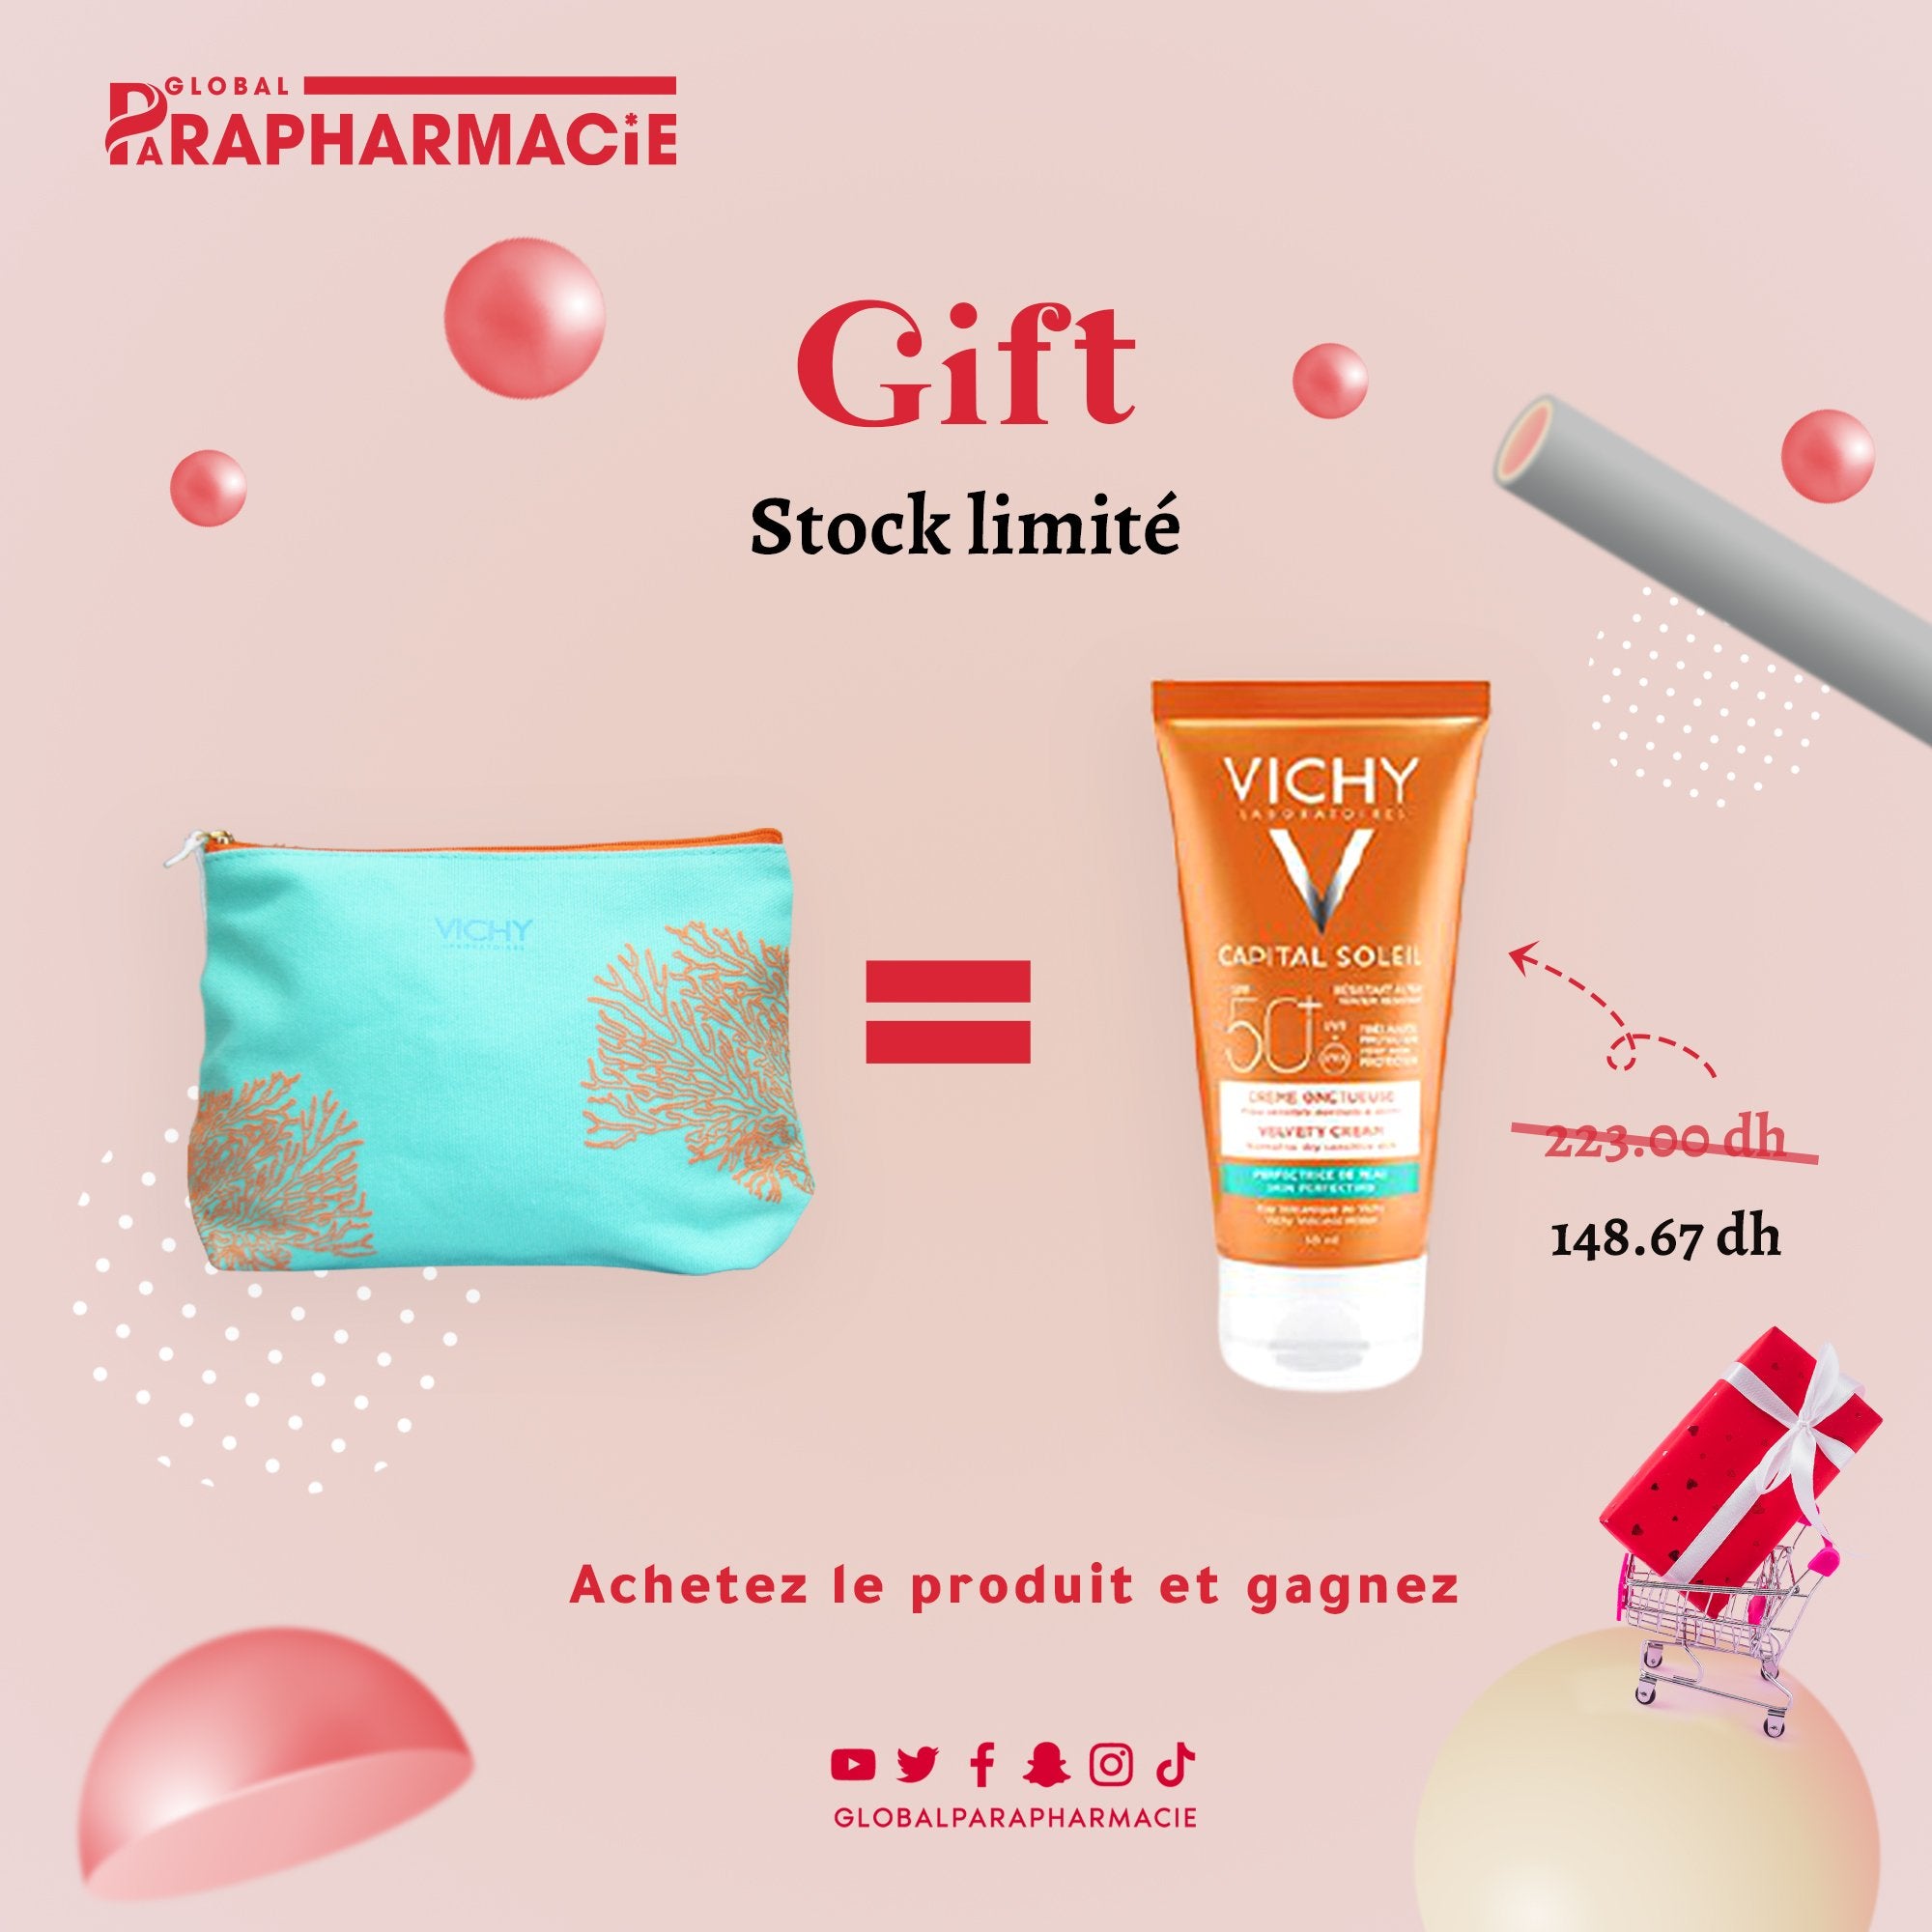 Vichy Capital Soleil Crème Onctueuse Perfectrice De Peau IP50+ Tube 50ml Promo Gift Offert